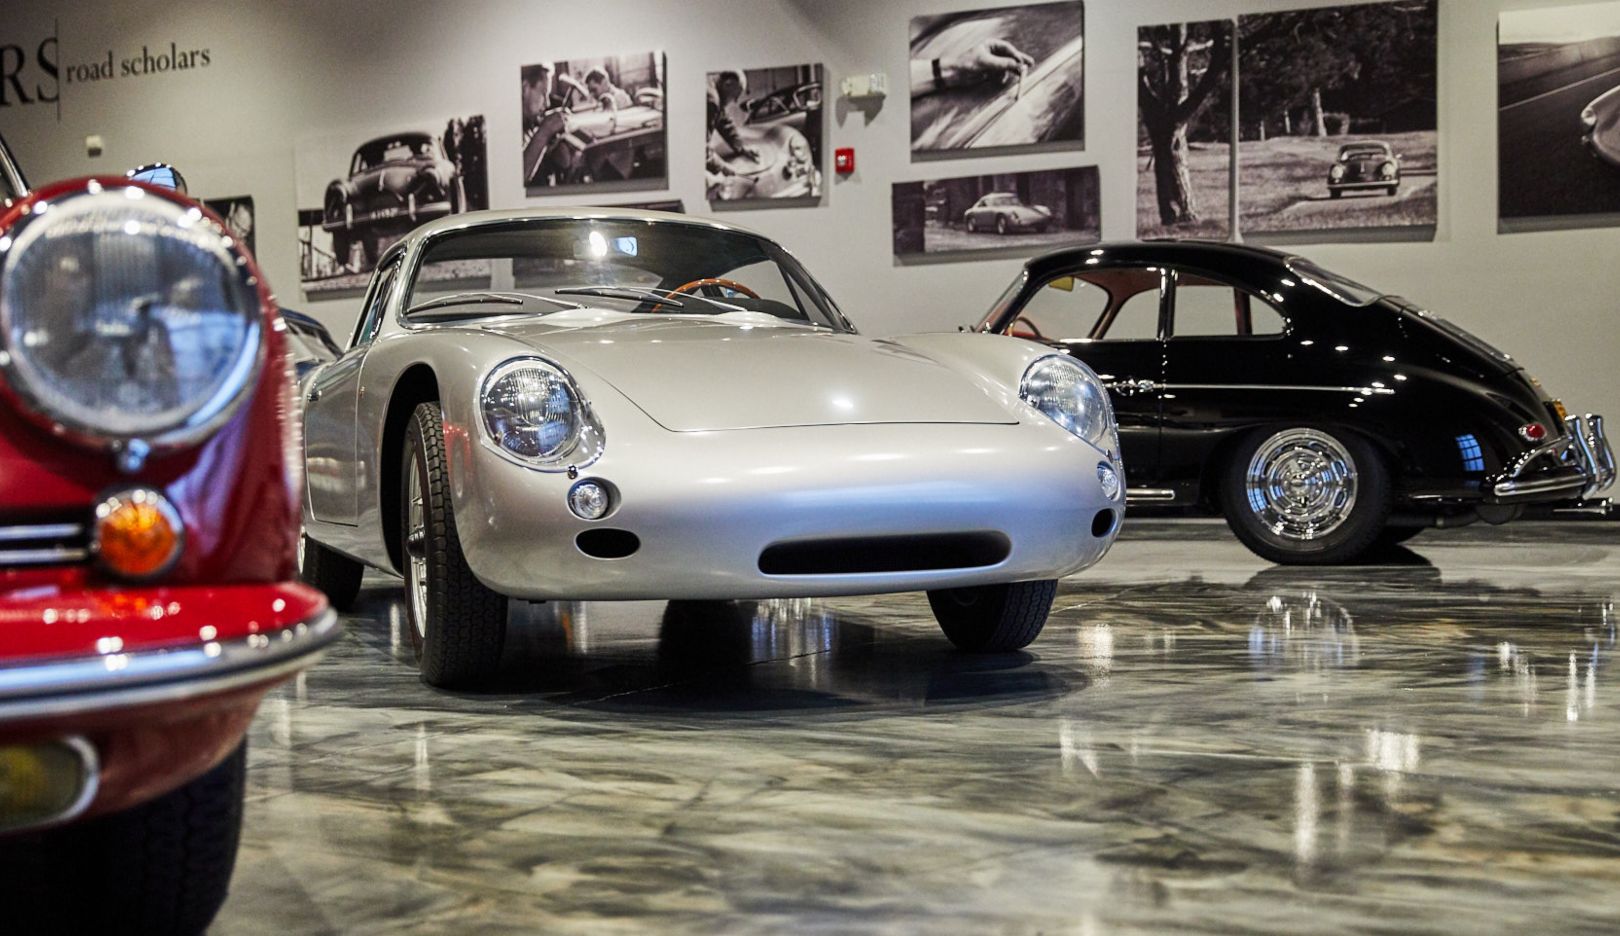 The extremely rare Porsche 356 B Carrera GTL Abarth is one of the jewels of the extensive collection.